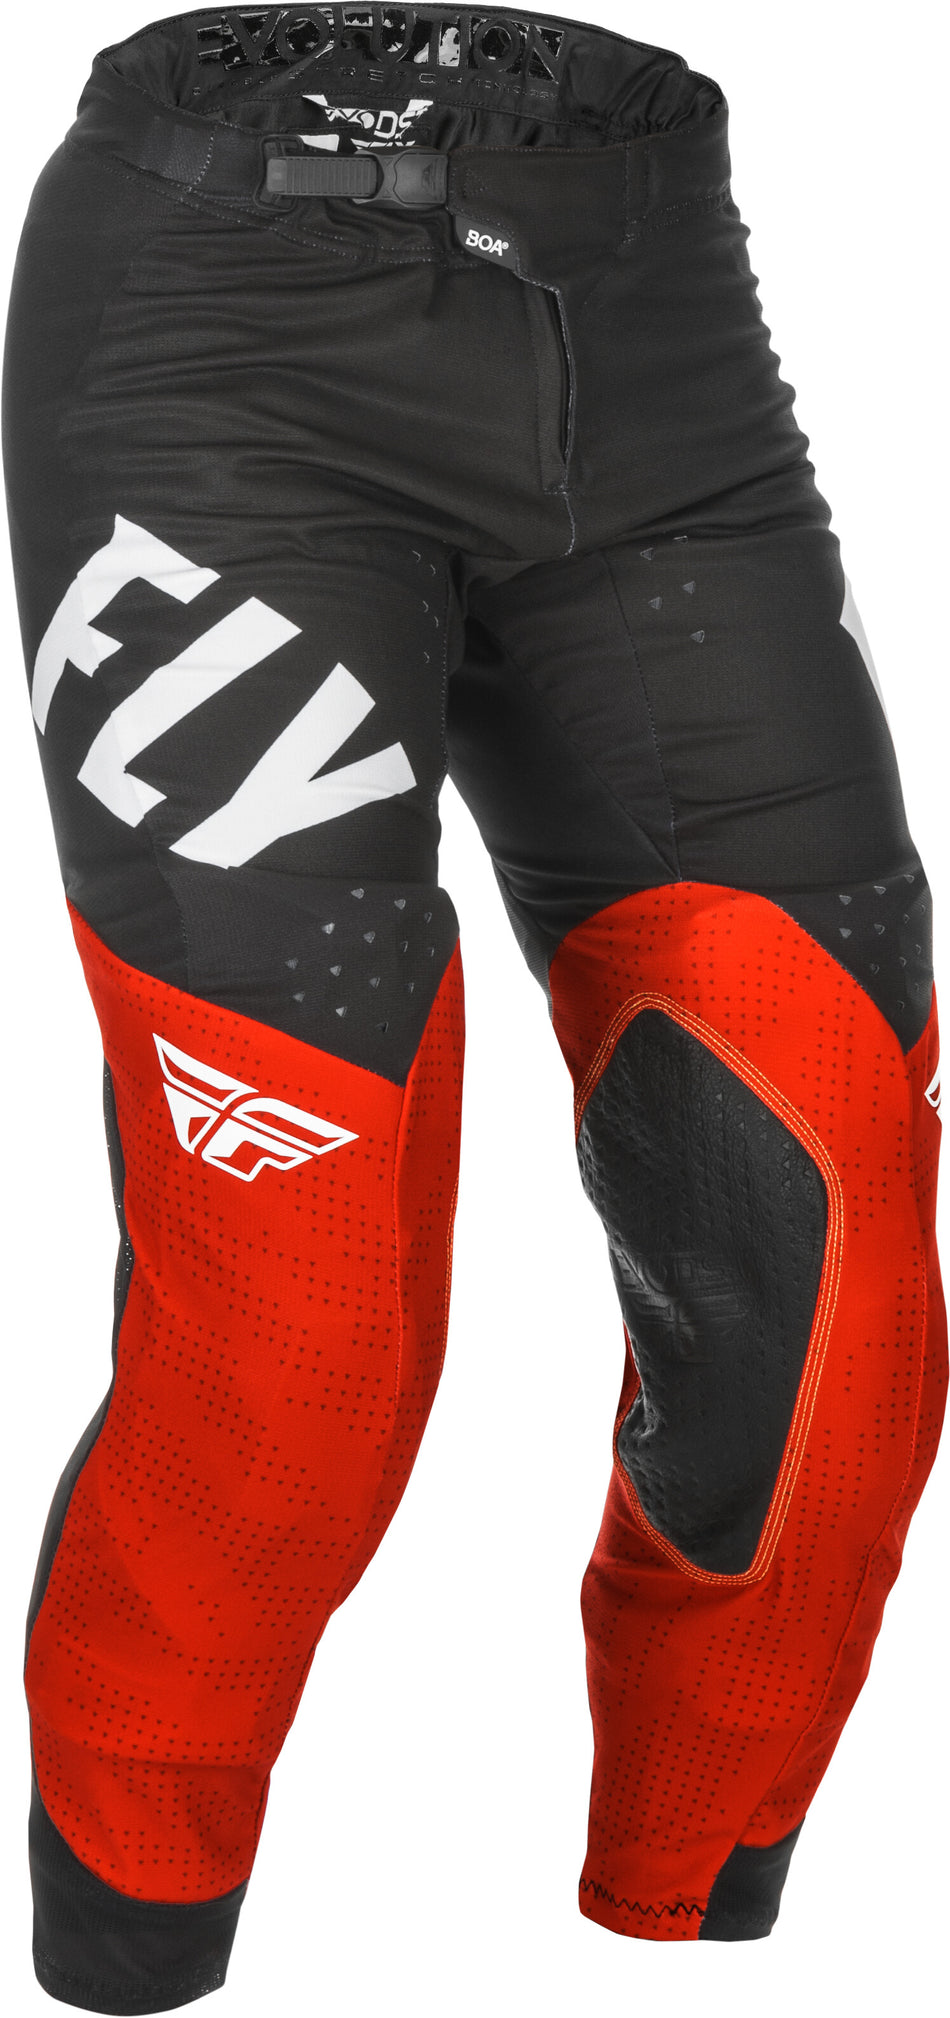 FLY RACING Evolution Dst Pants Red/Black/White Sz 34 374-13234